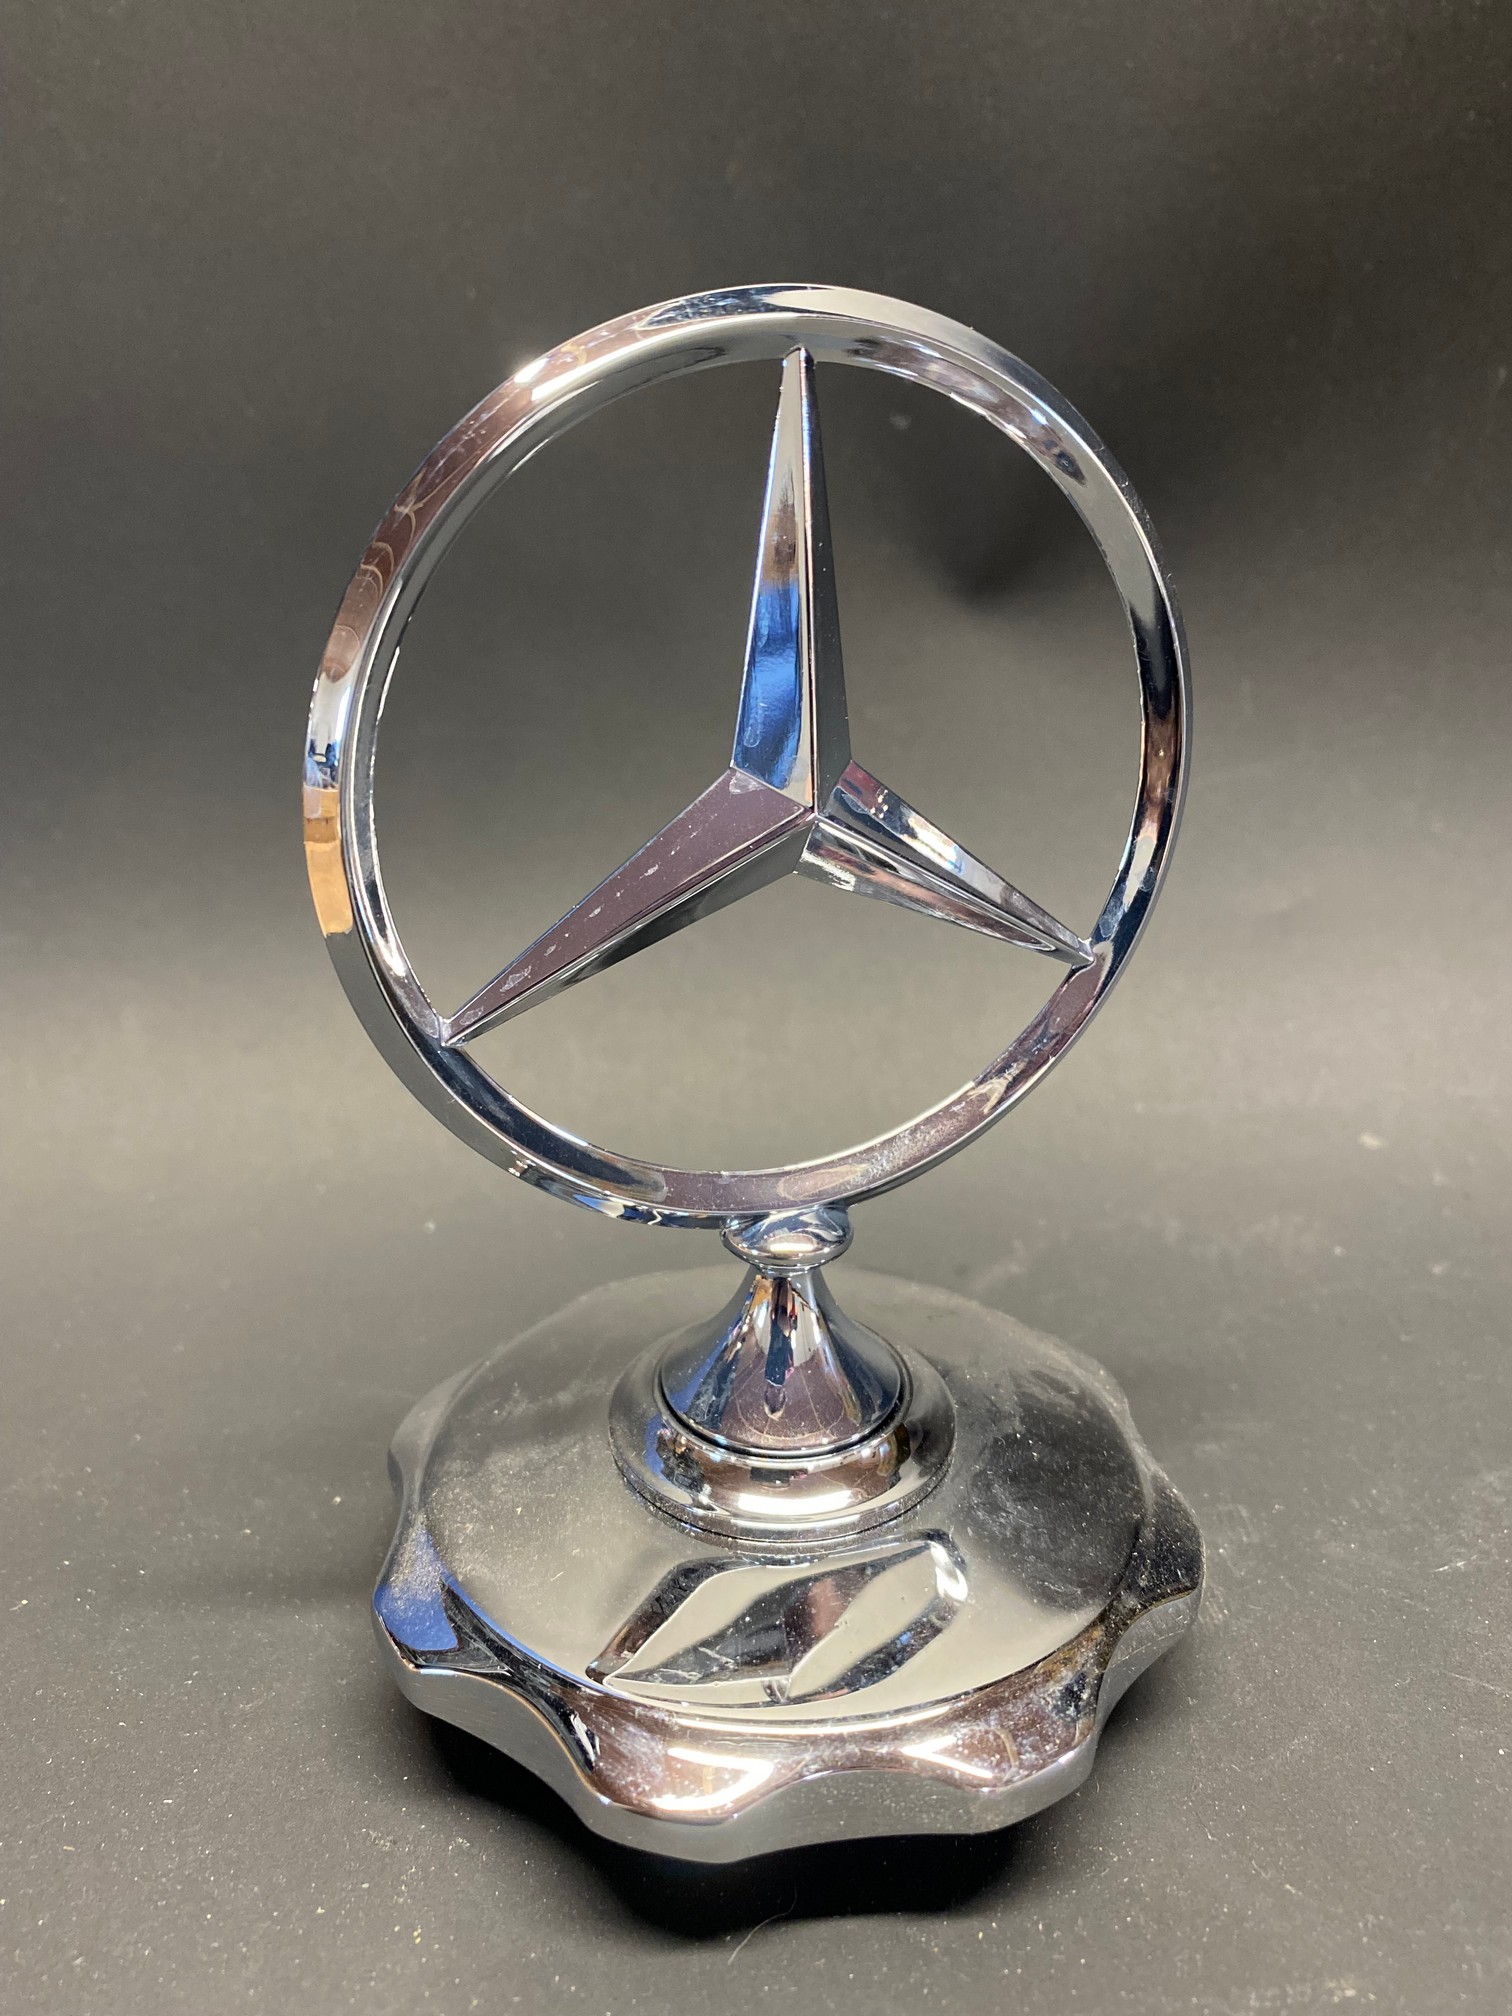 A Mercedes Benz star mascot, radiator cap base, appears new or unused.